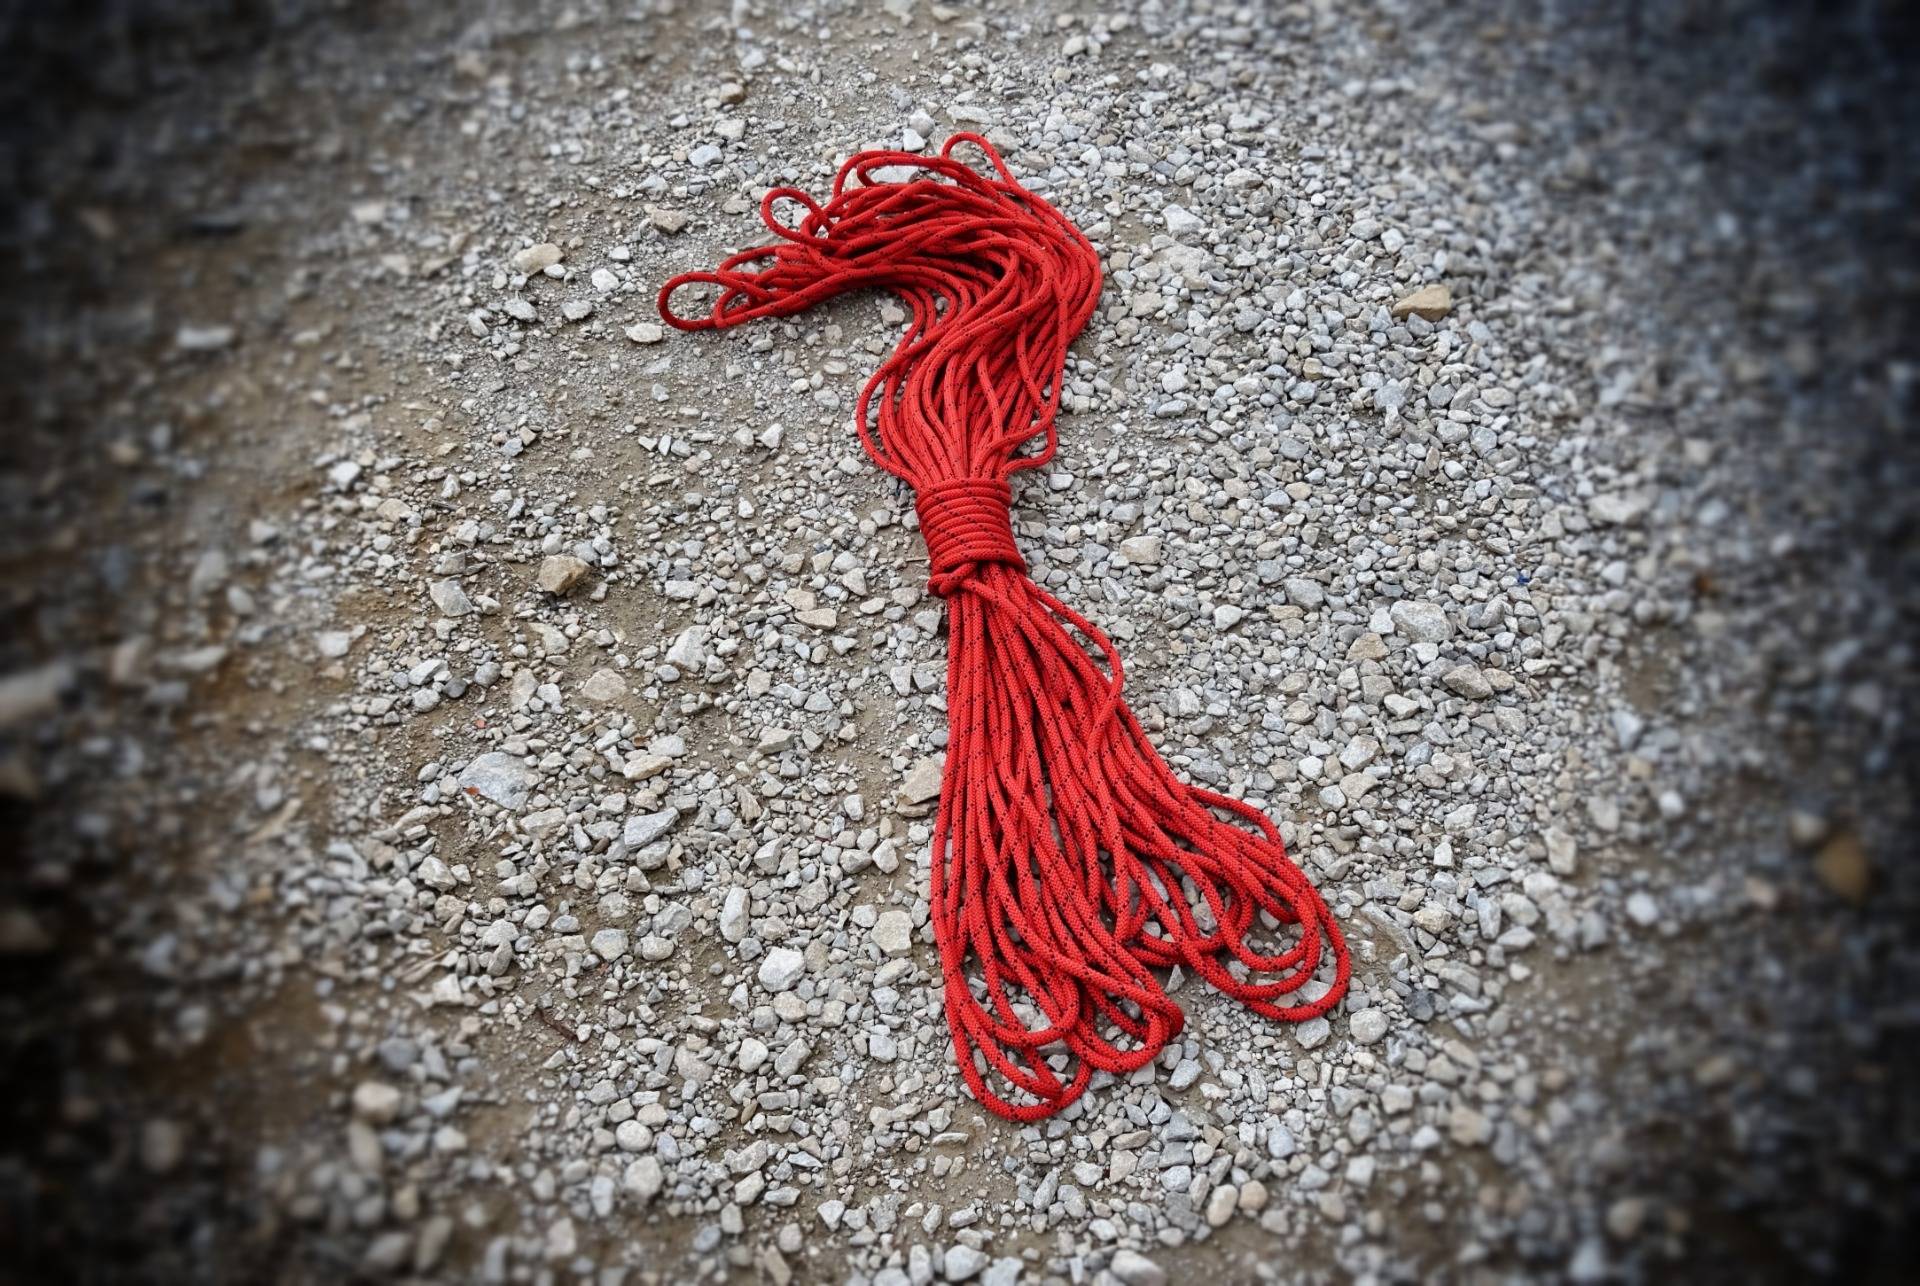 The rope that saves lifes